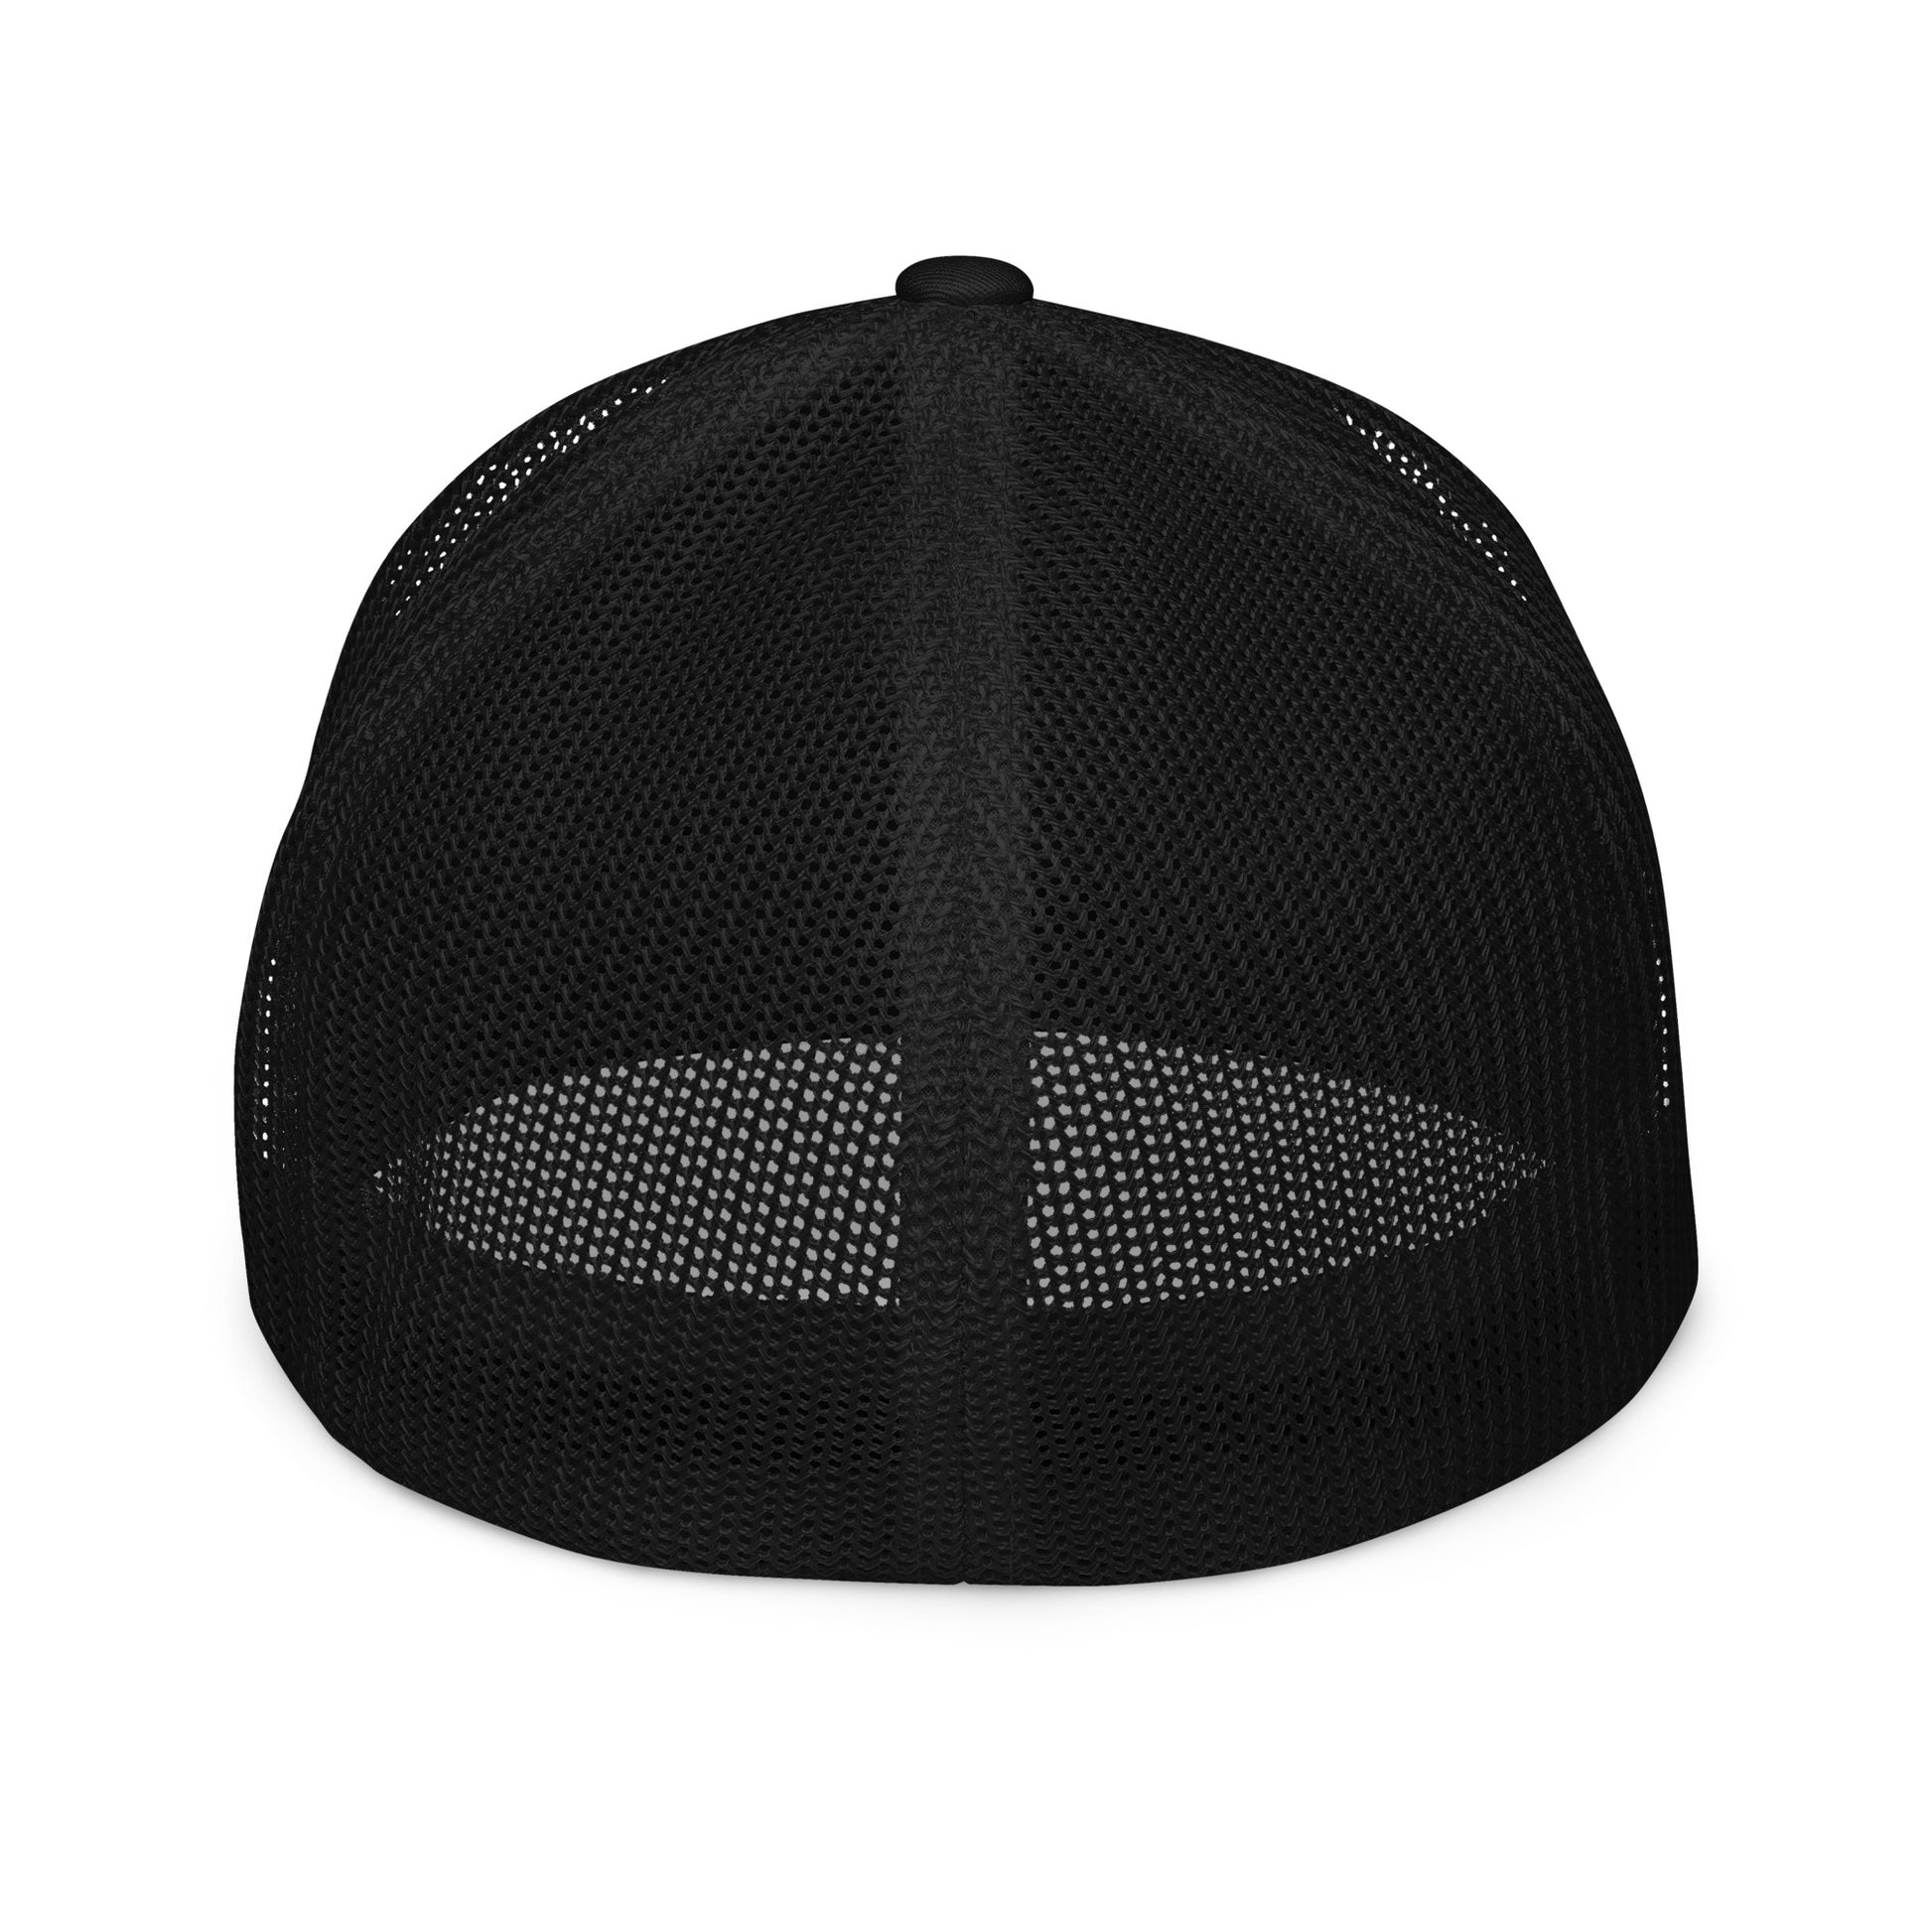 Closed-back trucker hat - Unreel Clothes for fishing and the outdoors.